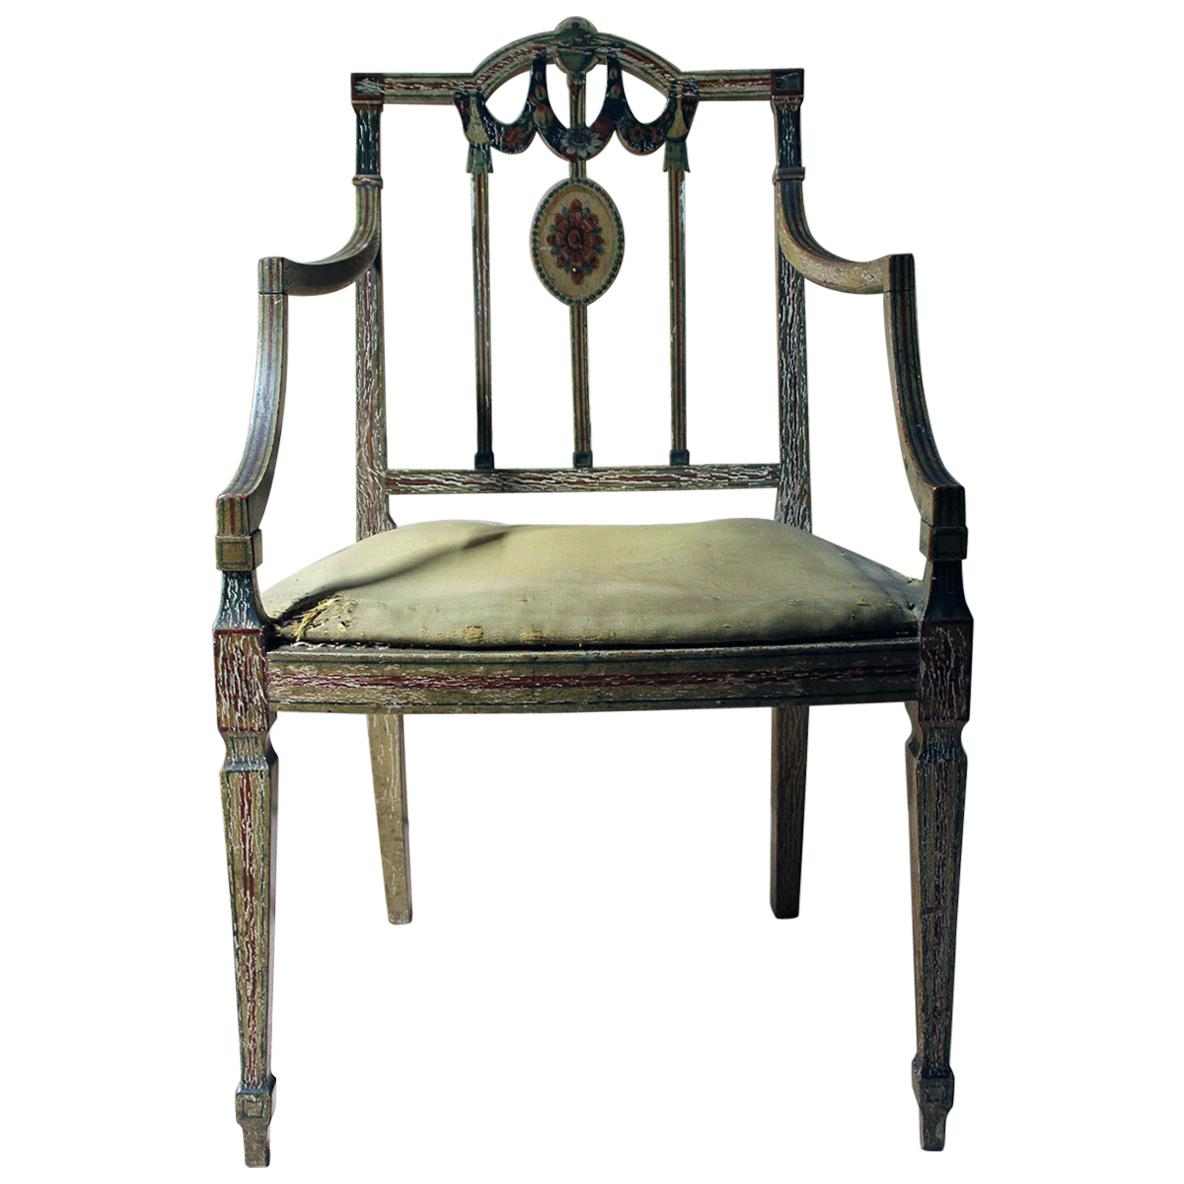 George III Period Painted Open Armchair, Attributed to Gillows, circa 1790-1795